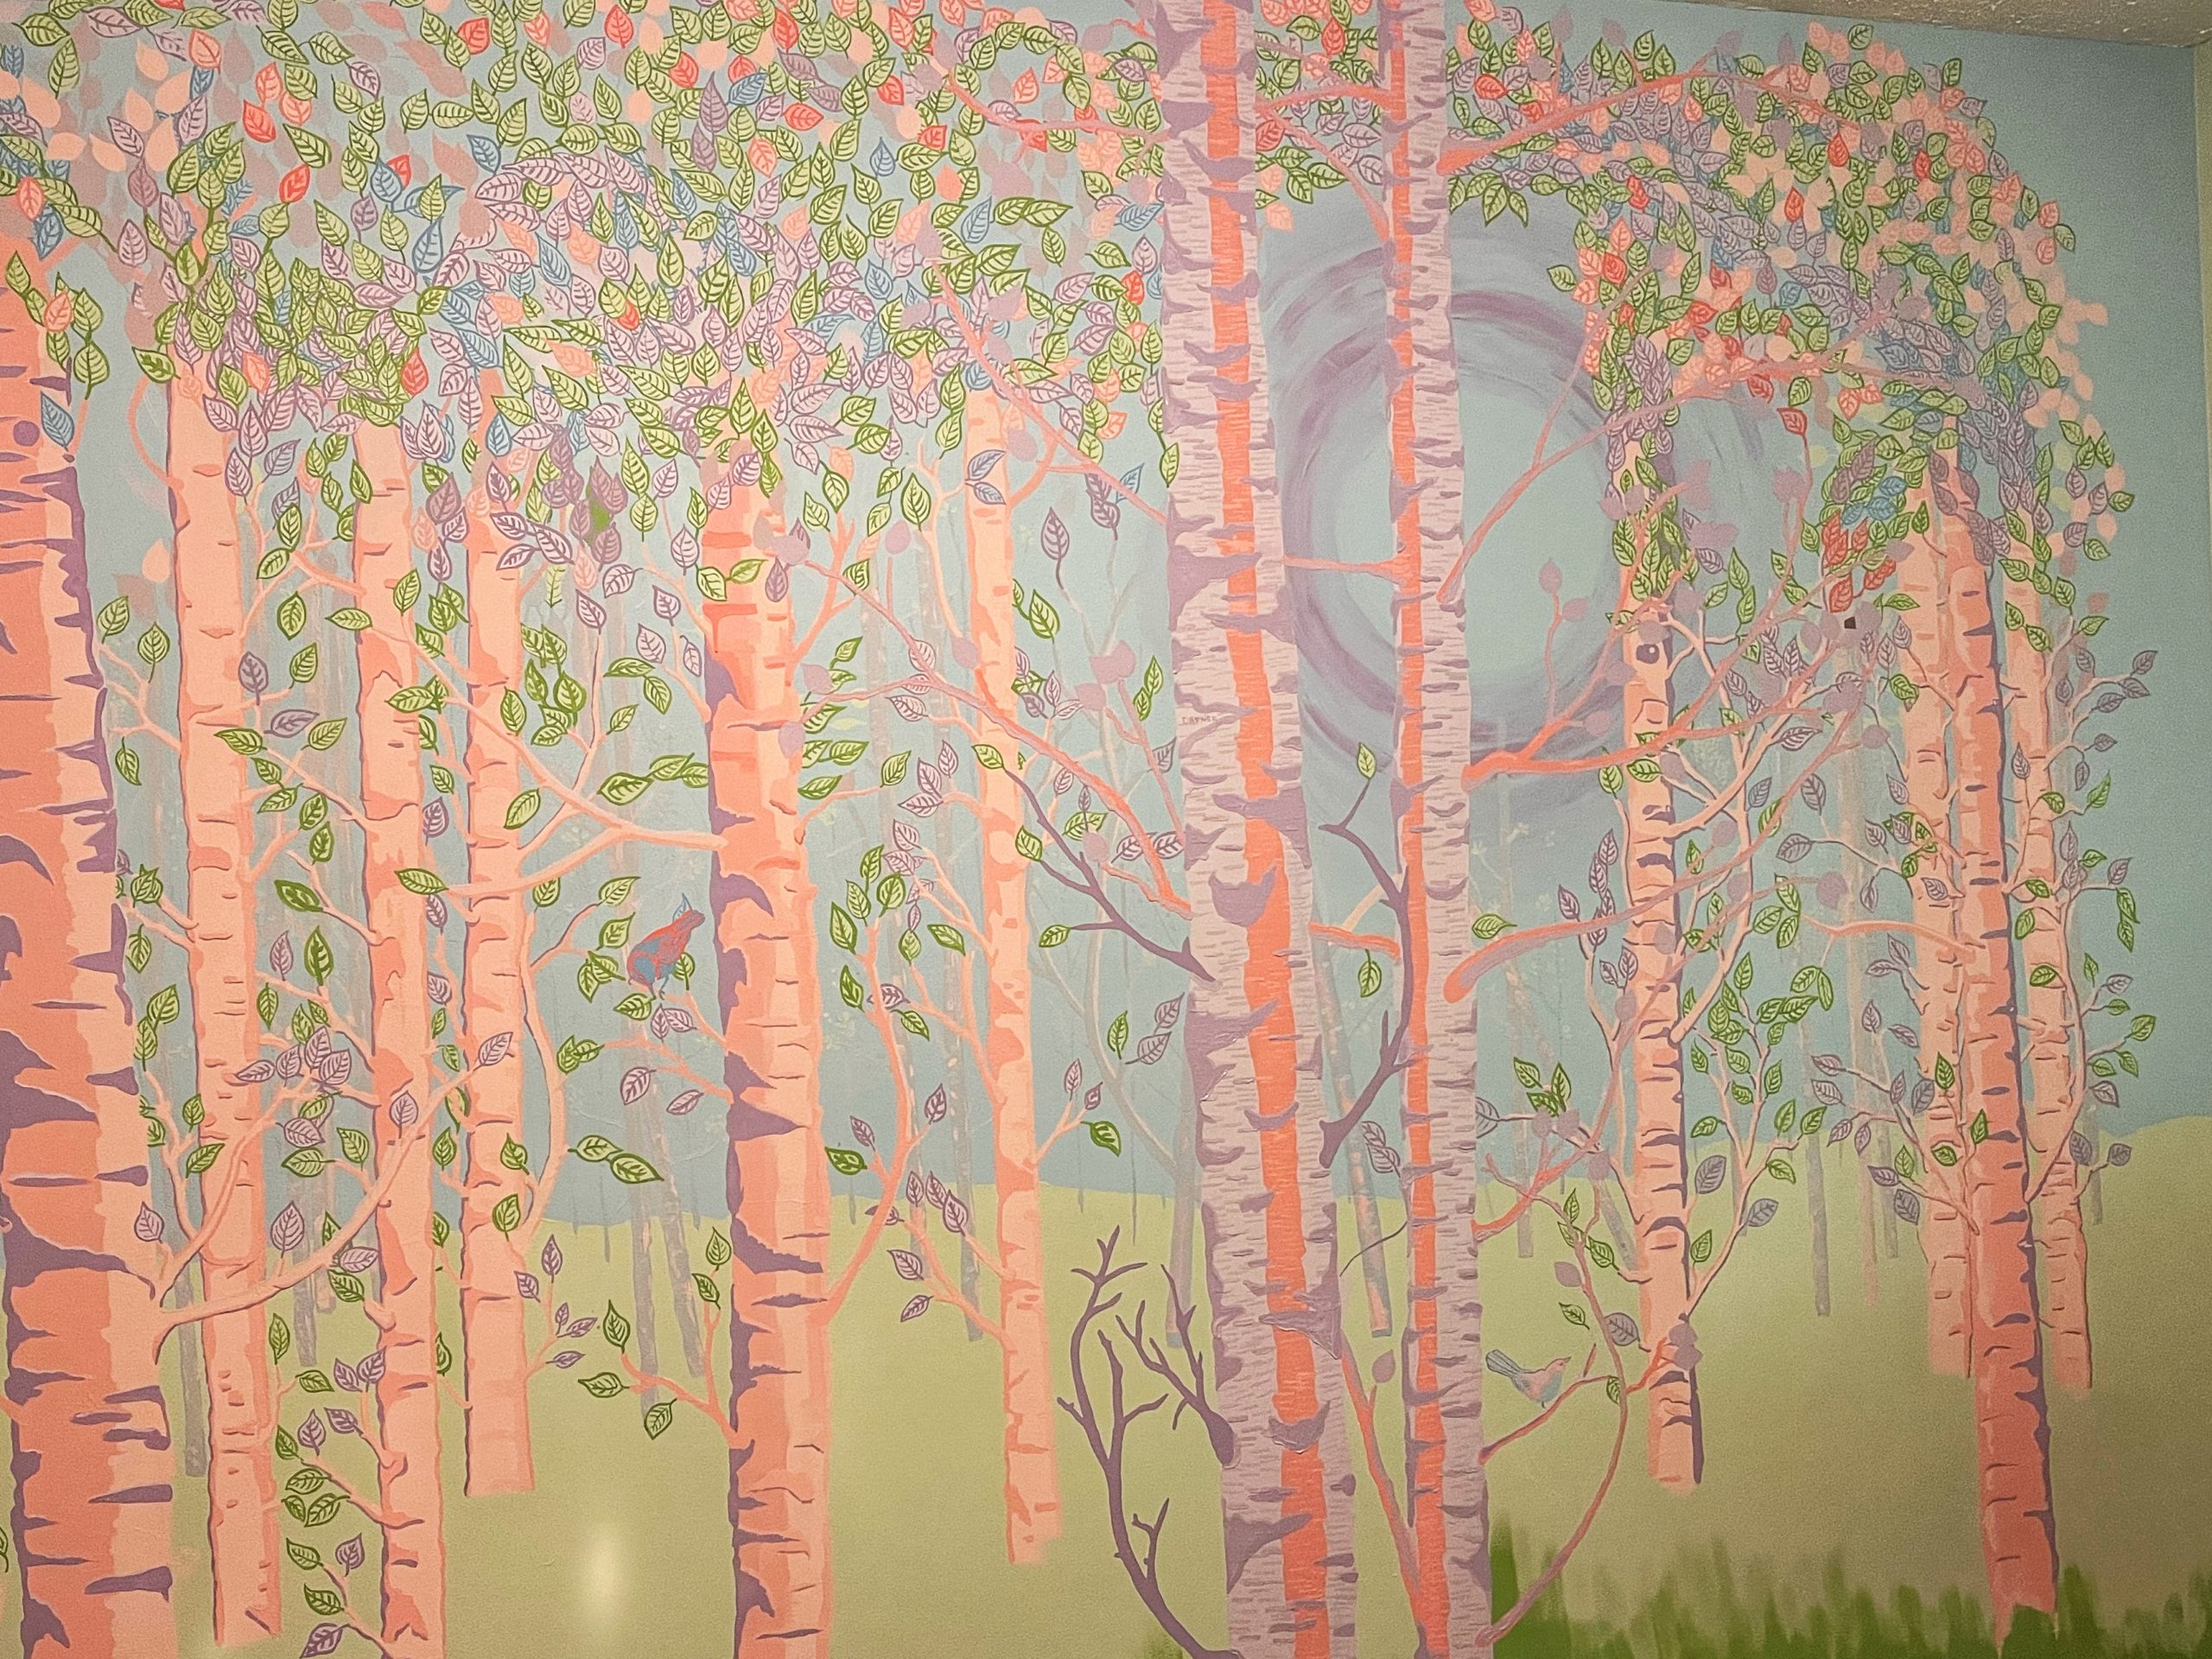 Unfinished mural of a fantasy forest in pinks and purples with some green and blue.